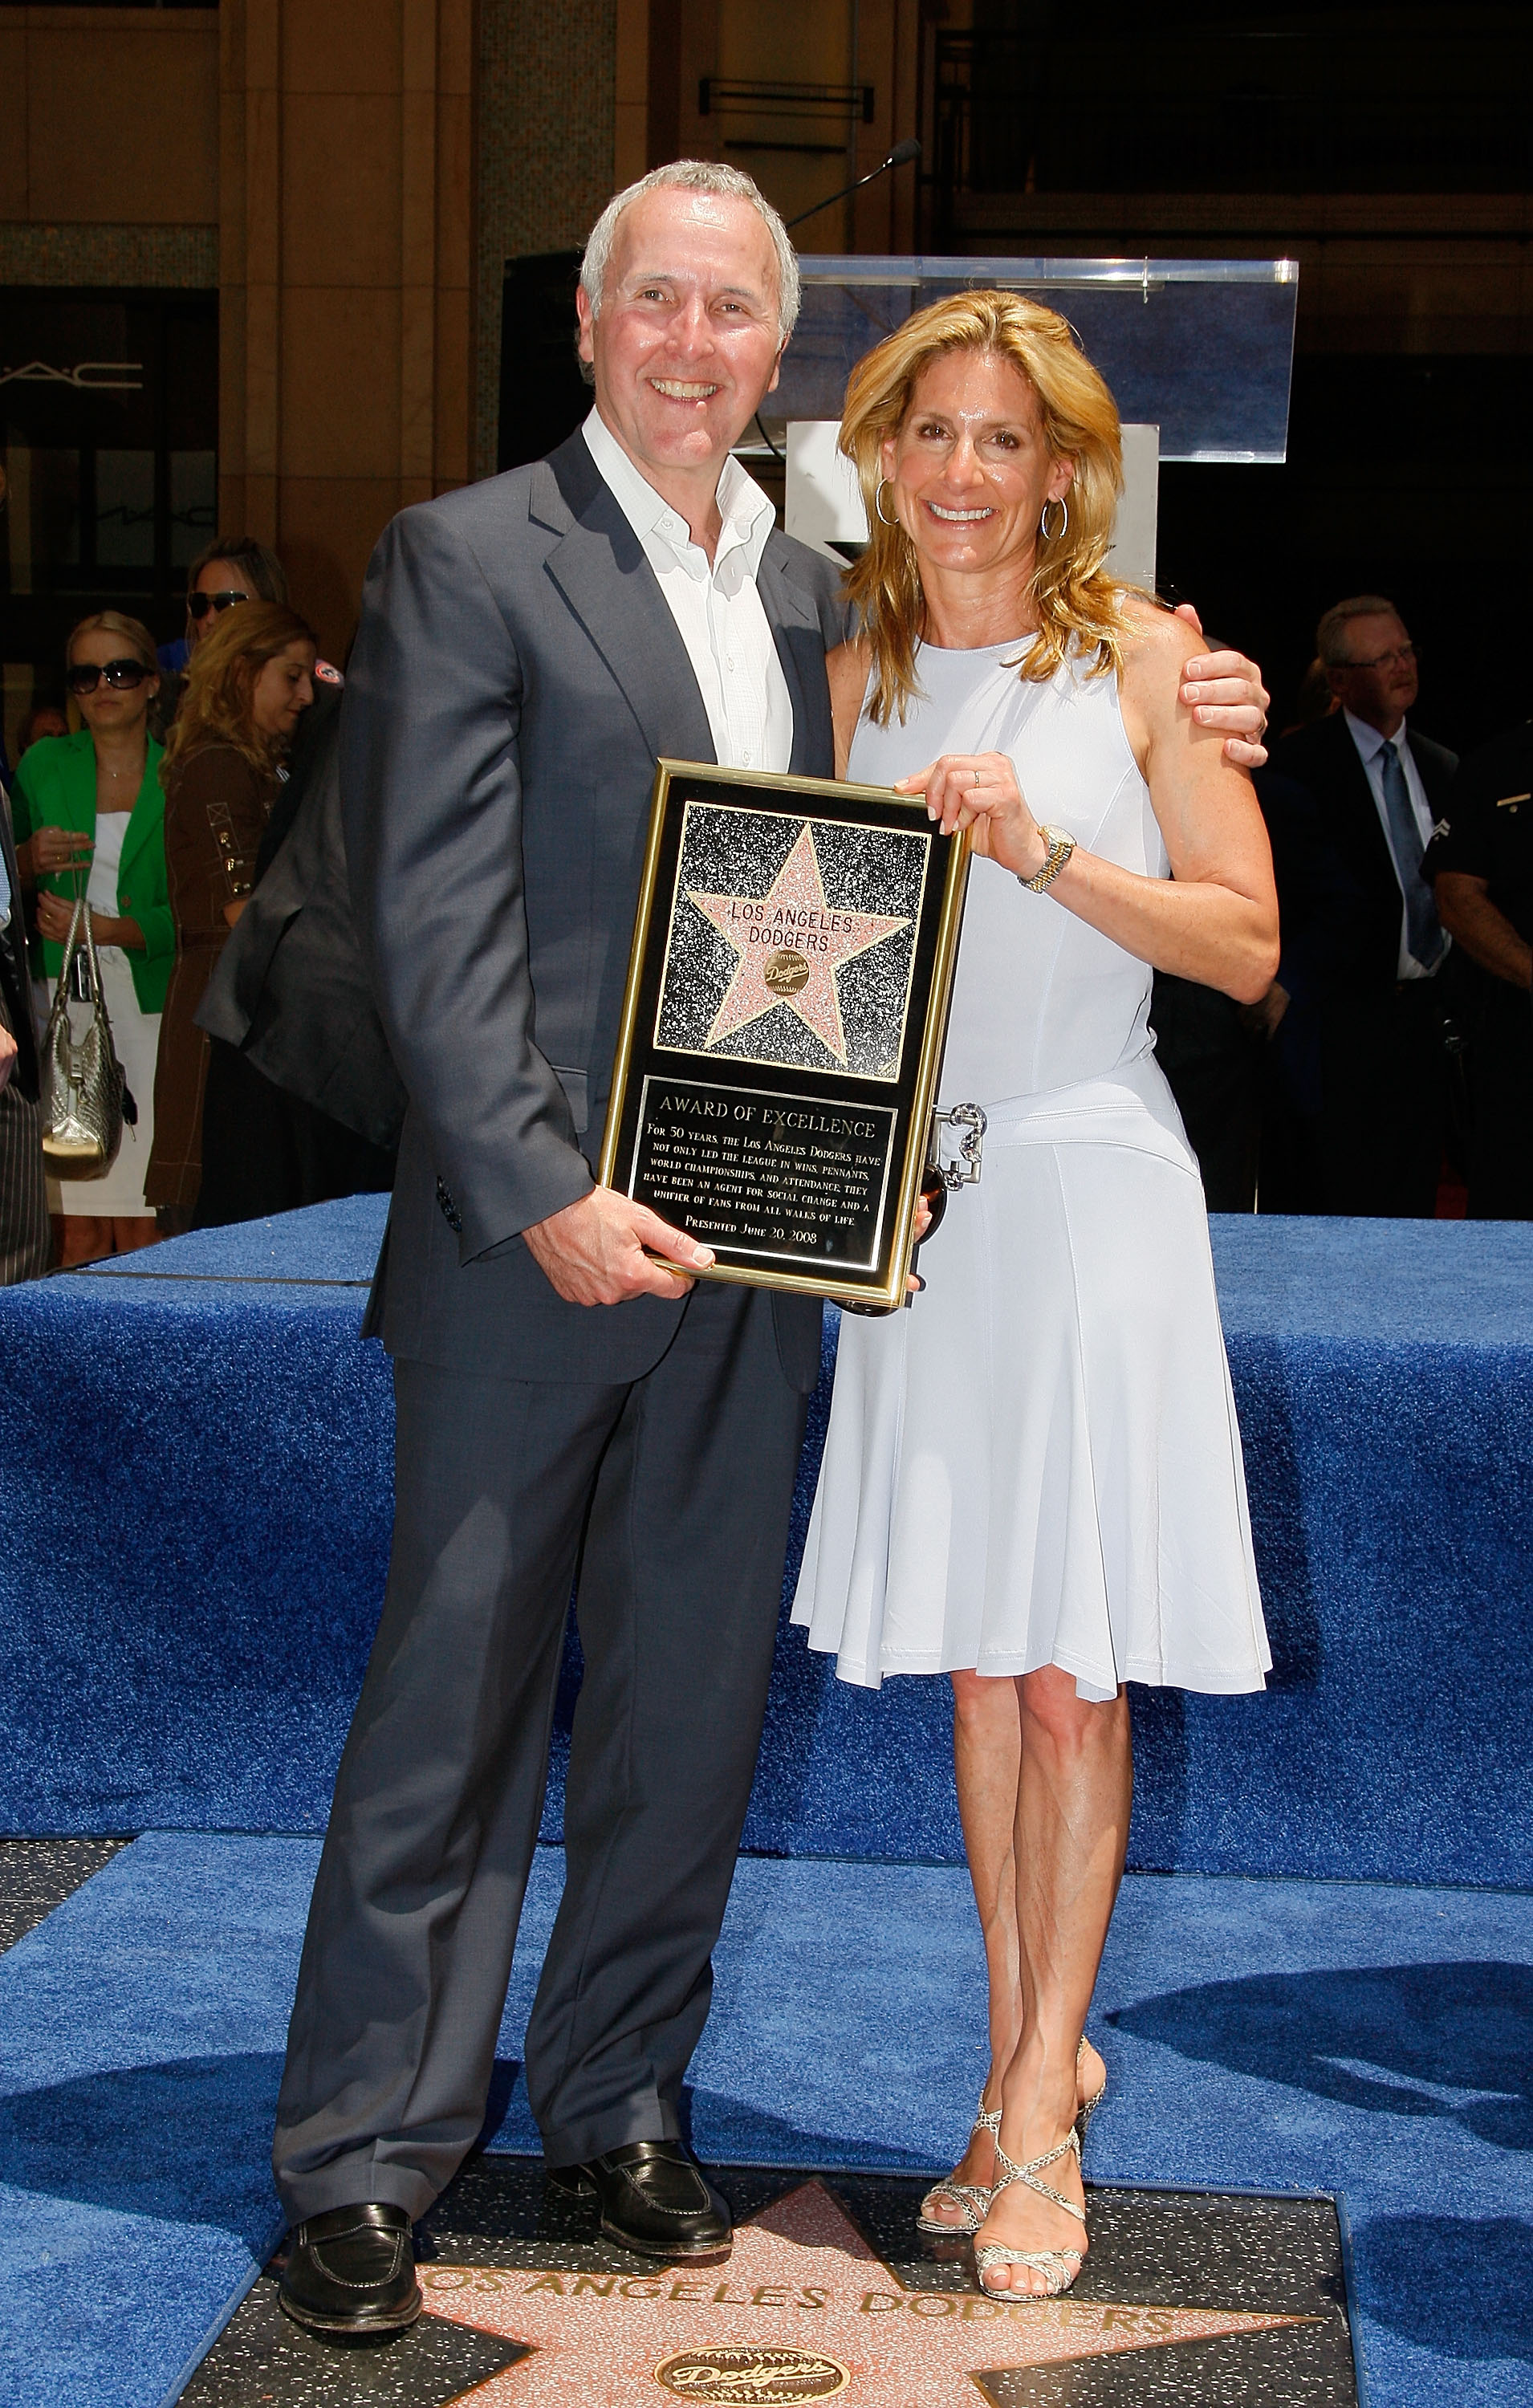 HOLLYWOOD - JUNE 20:  Team owner Frank McCourt (L) and wife Jamie attend a special star ceremony honoring the Los Angeles Dodgers with an Award of Excellence on the Hollywood Walk of Fame on June 20, 2008 in Hollywood, California.  (Photo by Vince Bucci/G